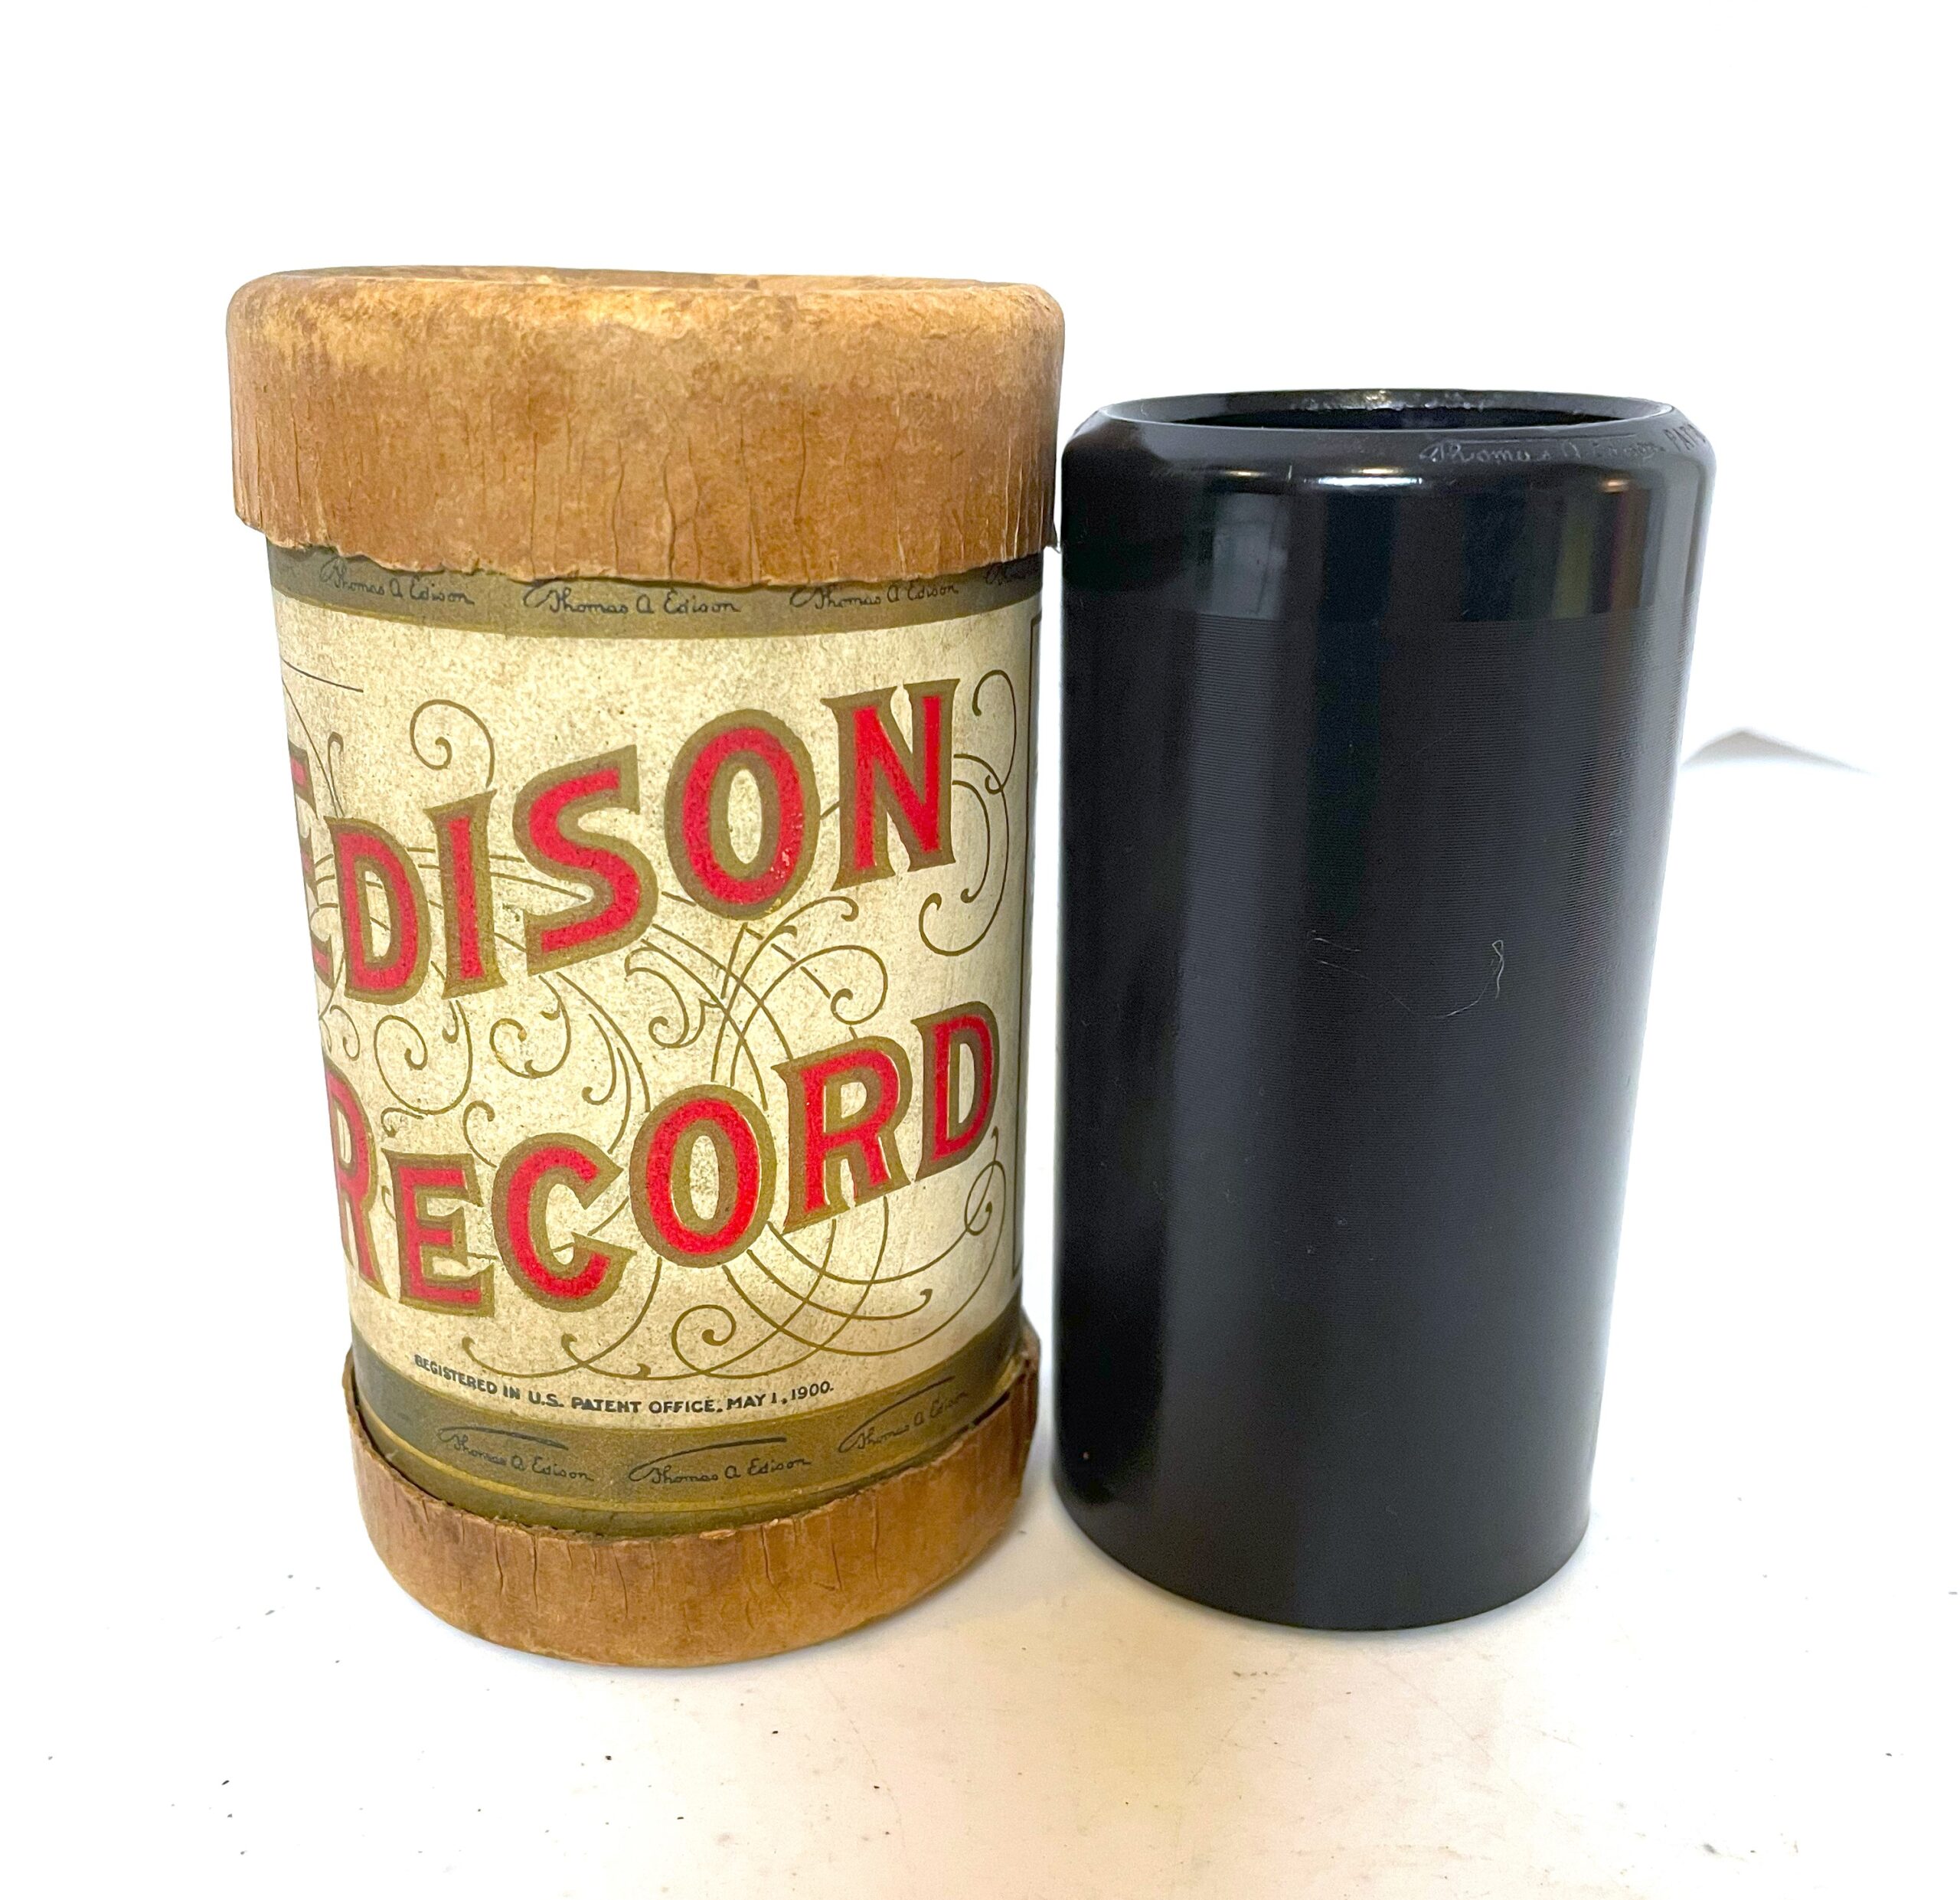 Edison 2-minute Cylinder…” Whiter than Snow“